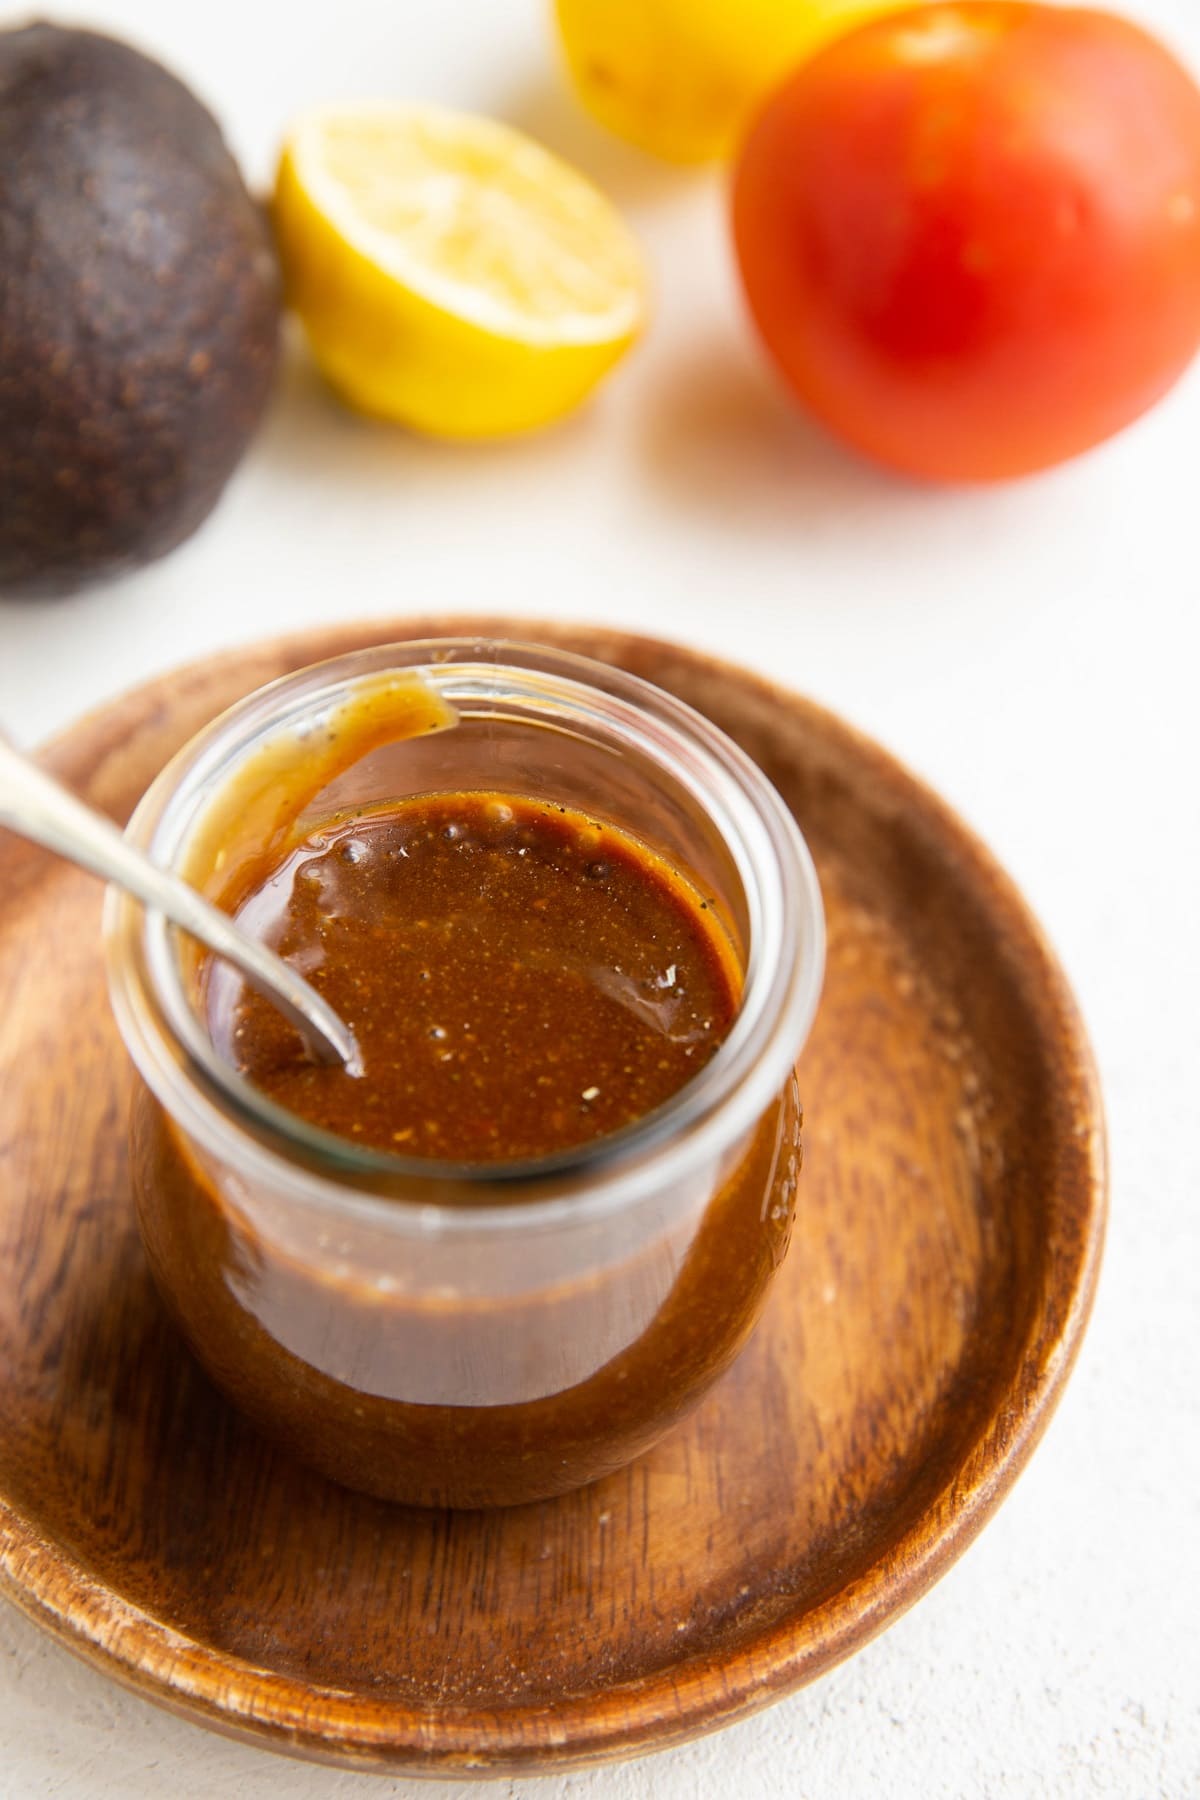 Jar of balsamic vinaigrette with a tomato, lemon, and avocado in the background.